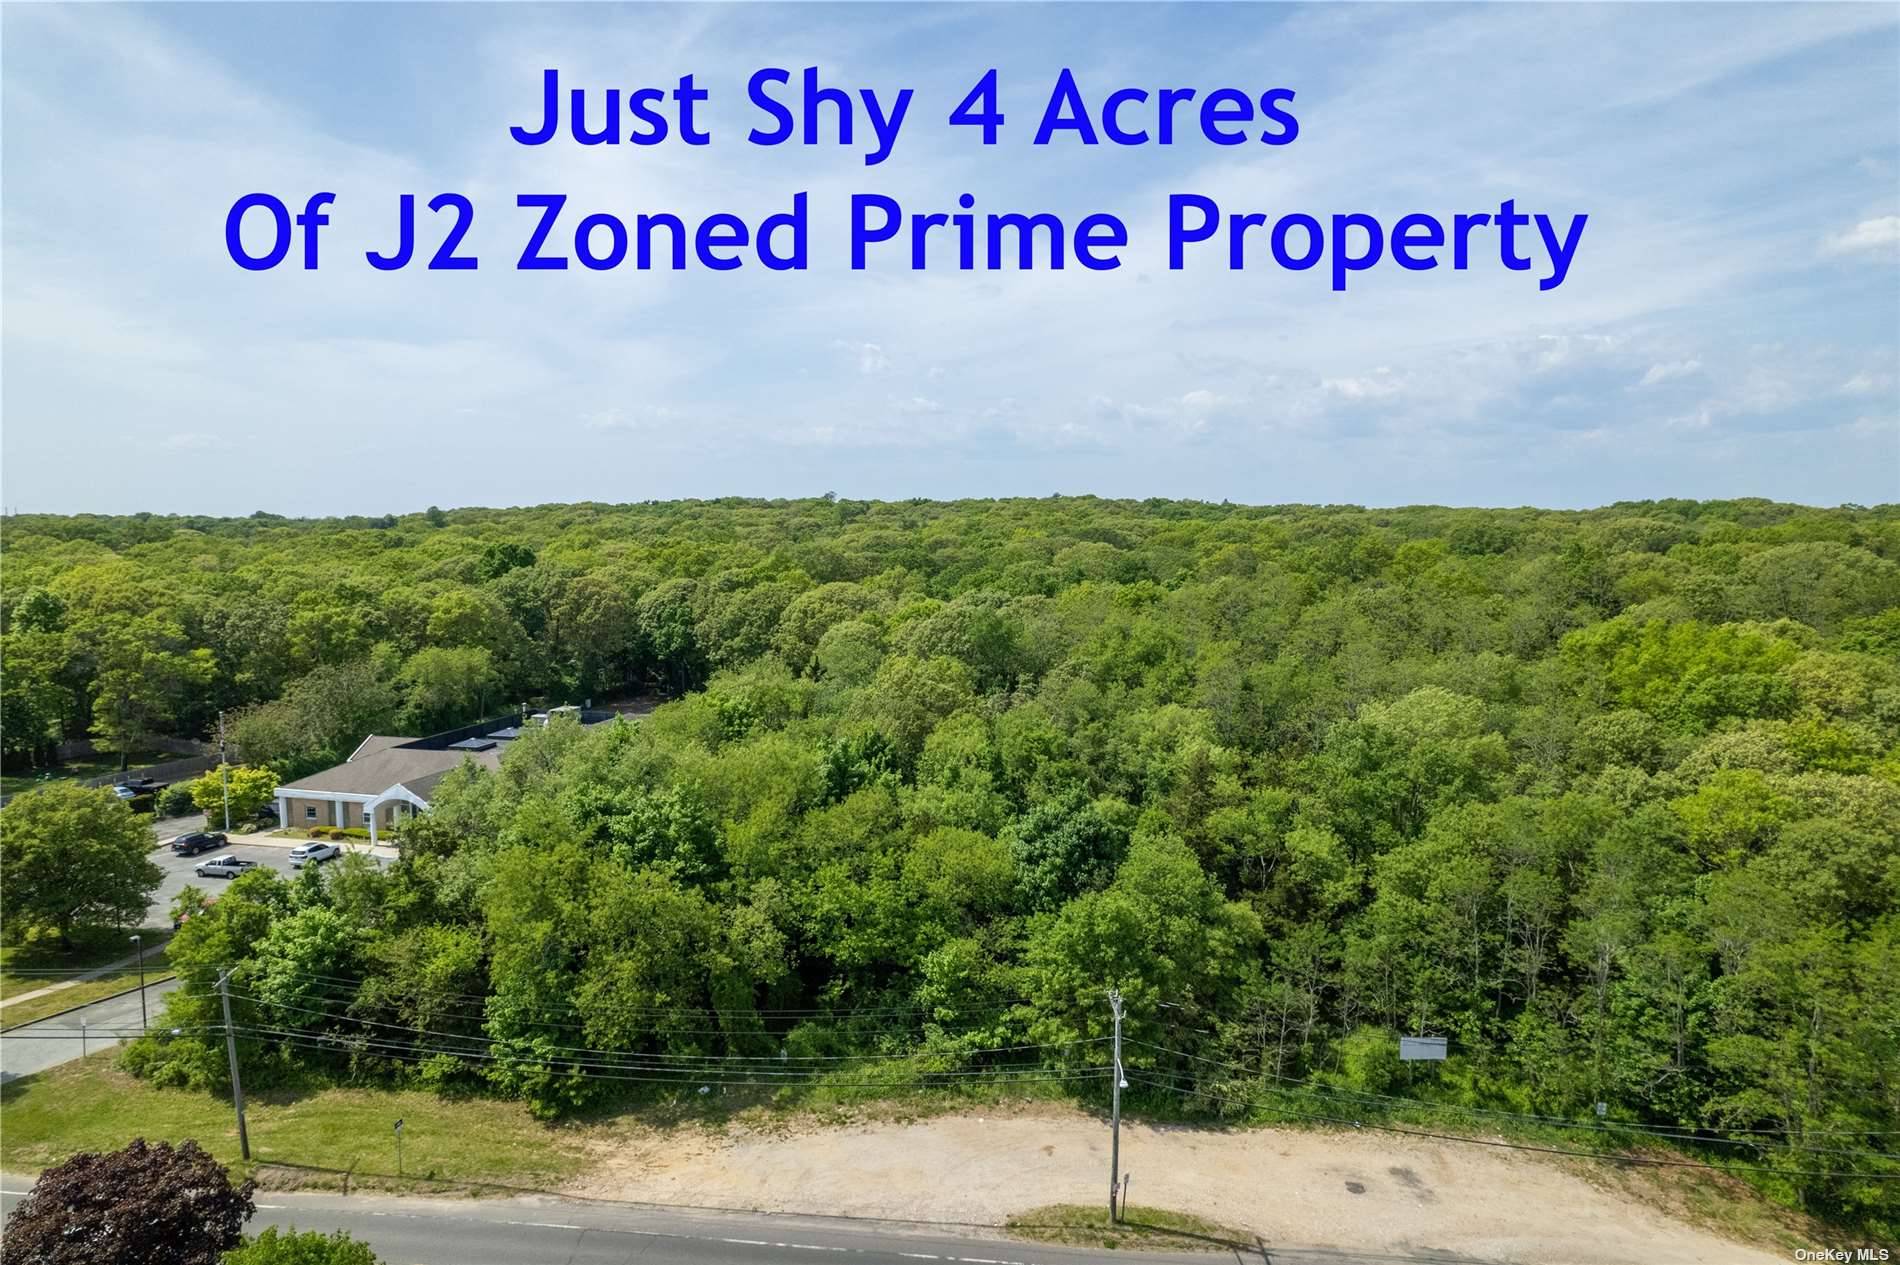 Amazing opportunity to own just shy of 4 Acres of J2 Zoned property.